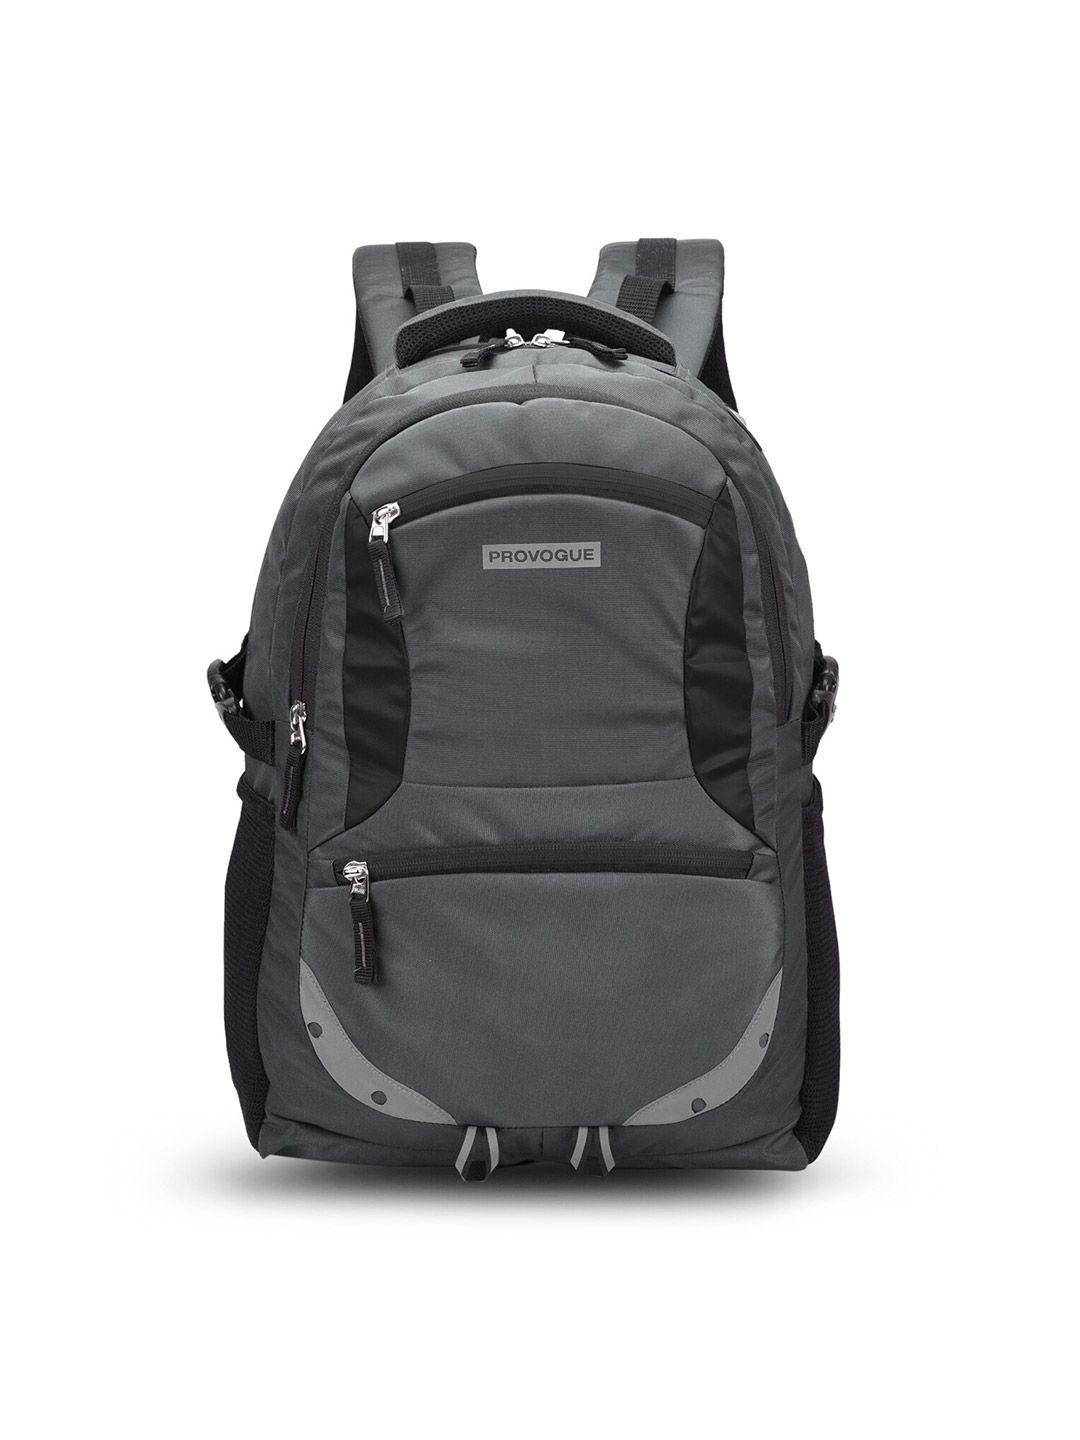 Provogue Unisex Grey & Black Brand Logo Backpack with Reflective Strip Price in India